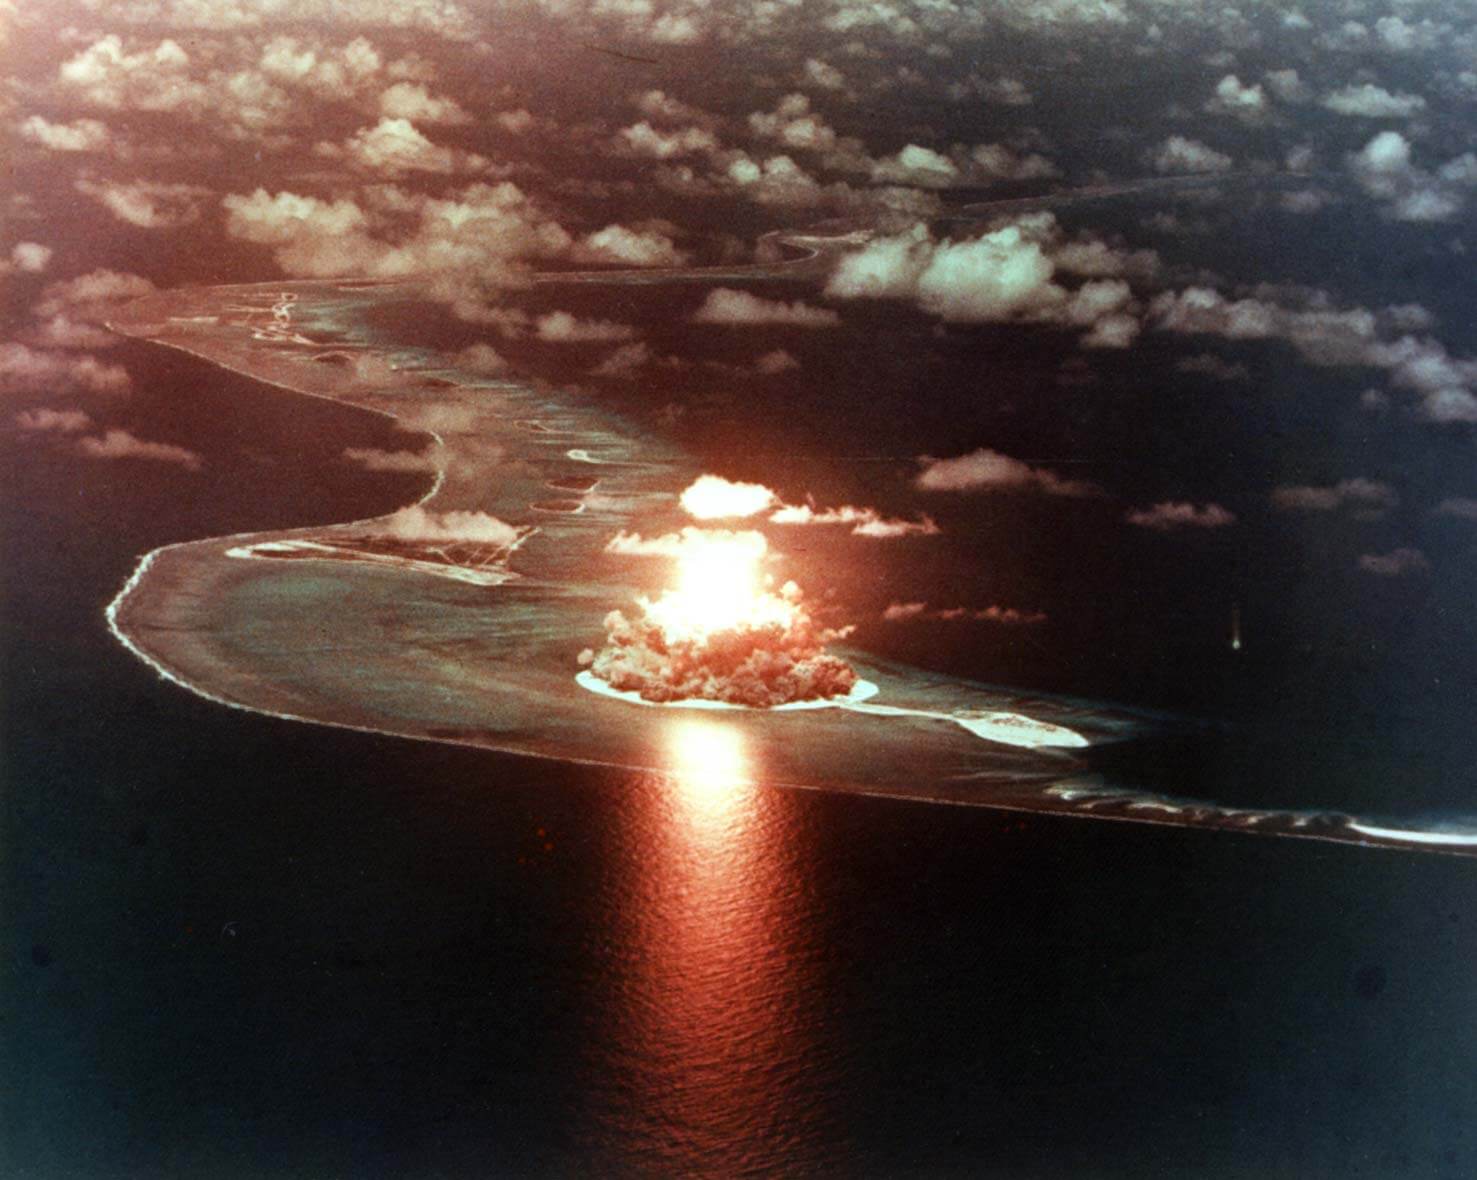 OndercoZutt-US nuclear weapons test at Eniwetok in 1956. © International Campaign to Abolish Nuclear Weapons - Flickr